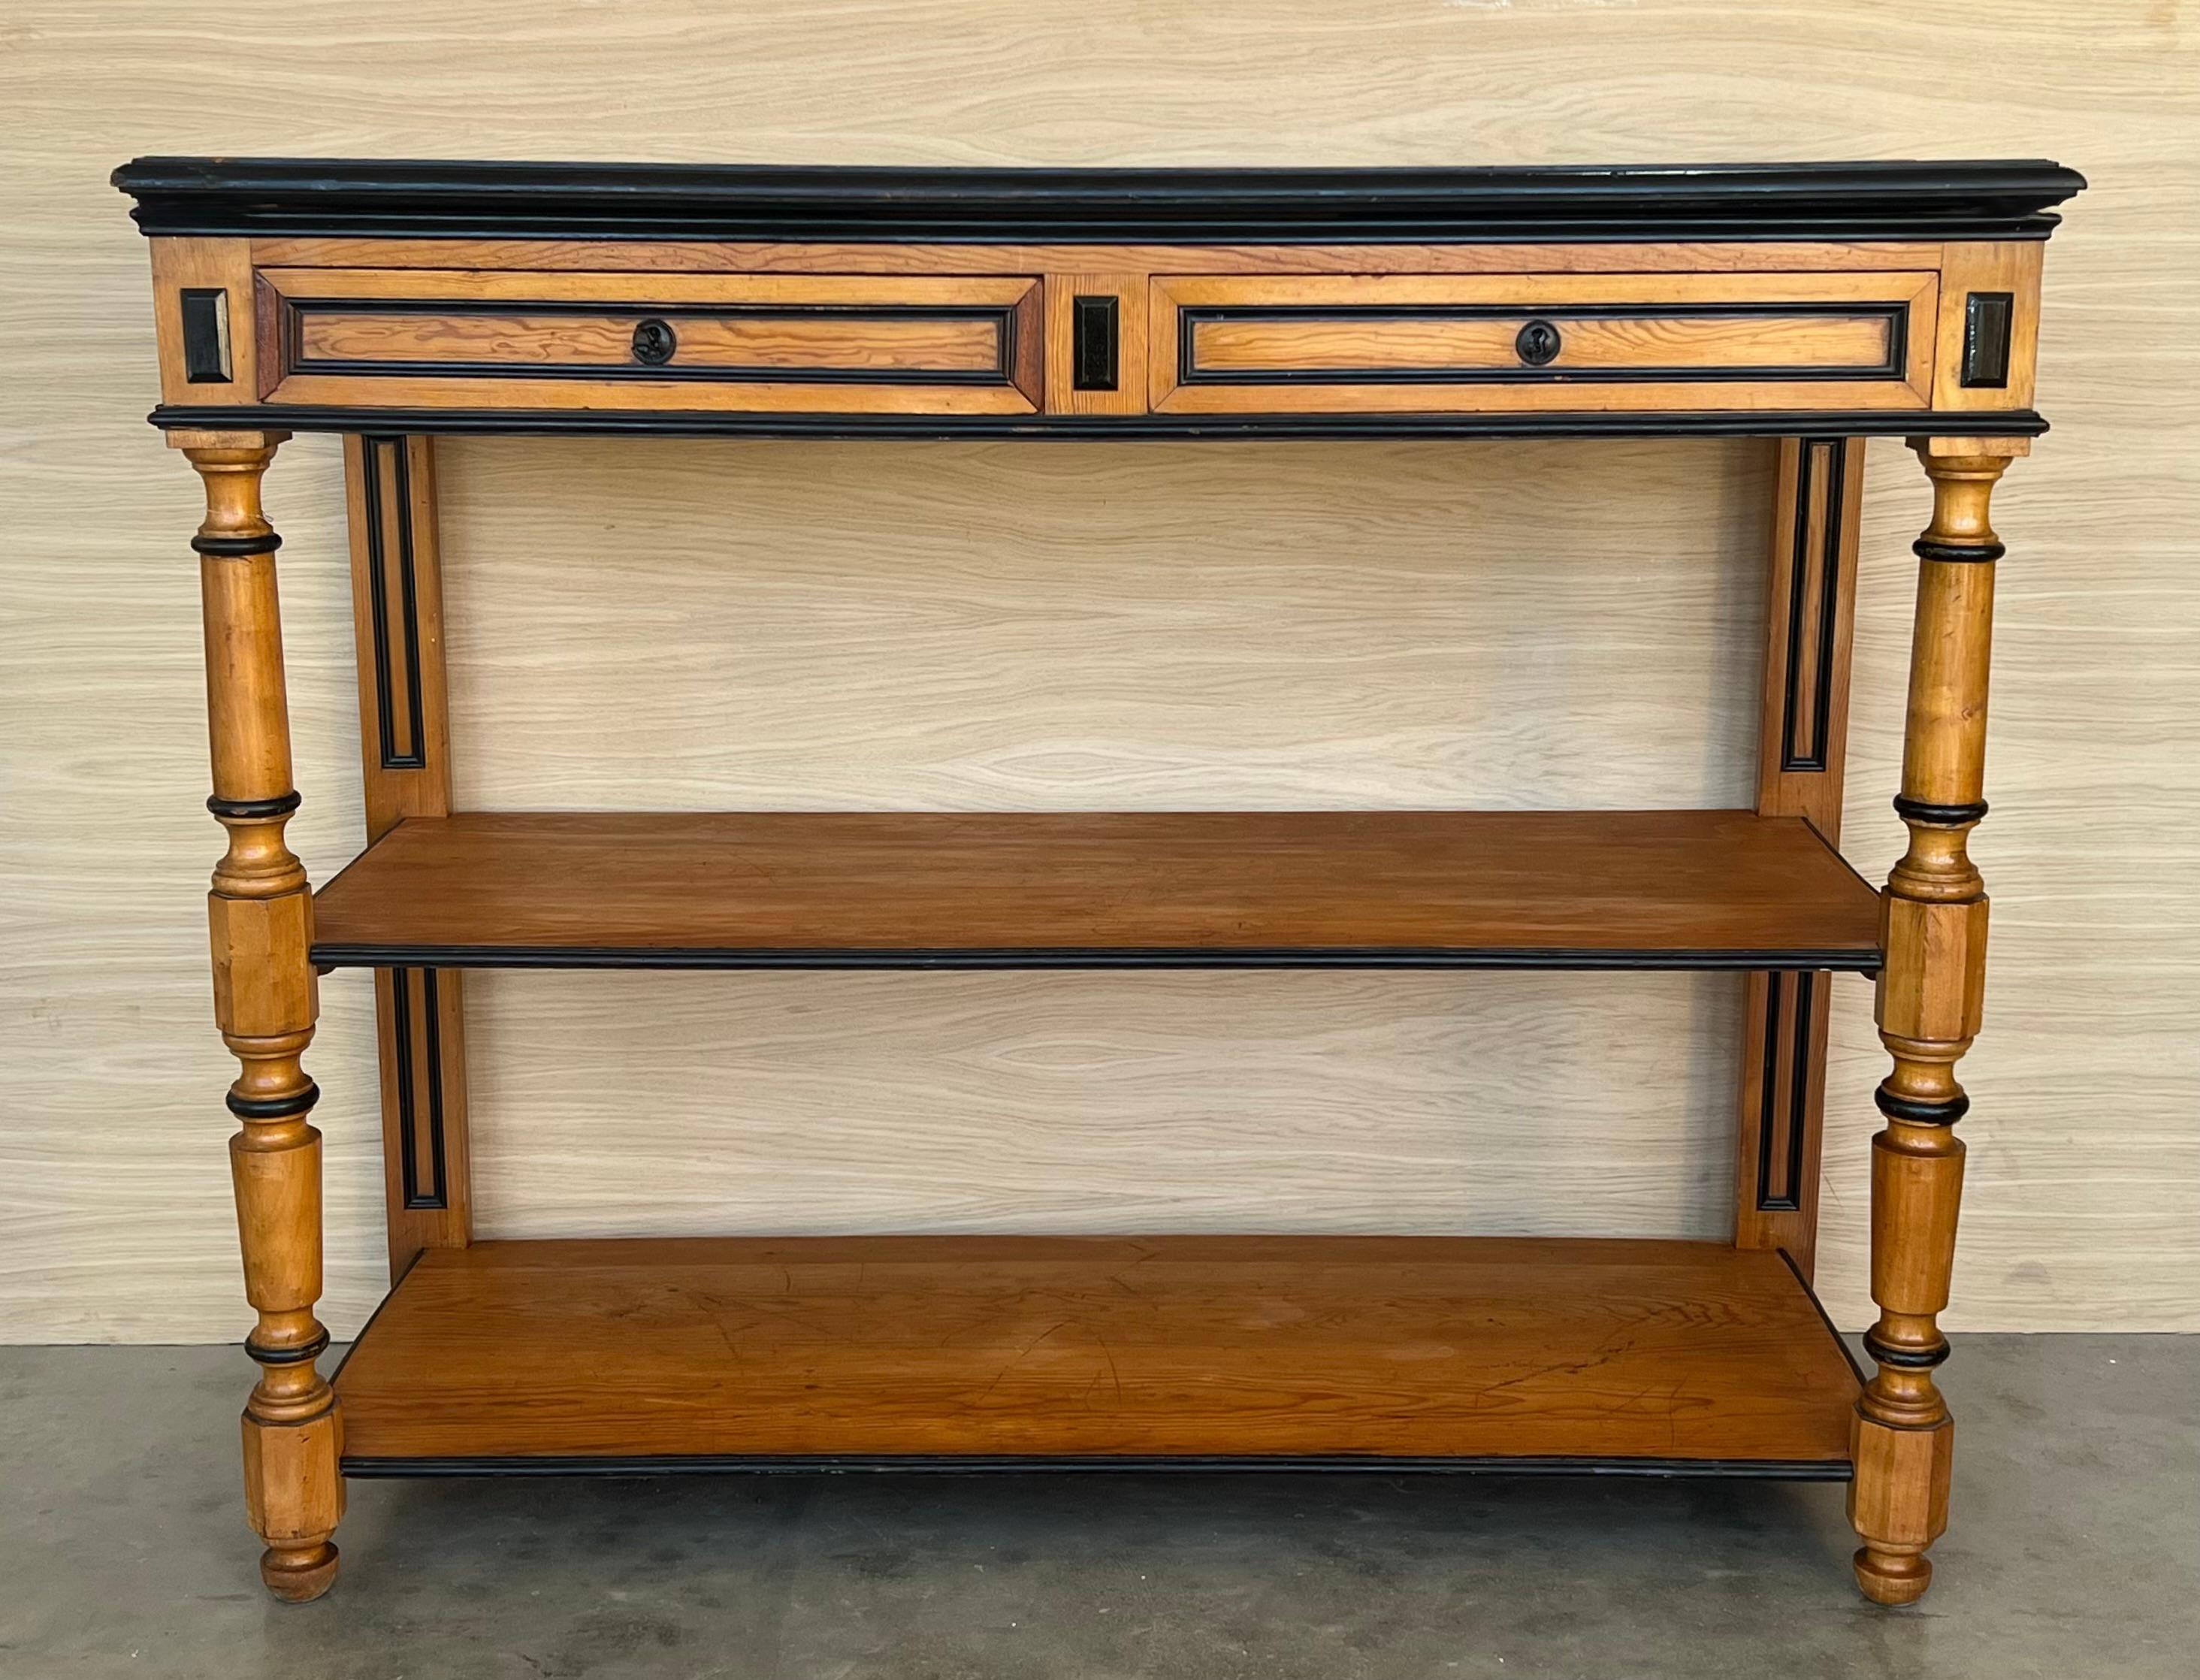 Early 20th C English Lemontree Three Tier Server or Buffet with Drawers In Good Condition For Sale In Miami, FL